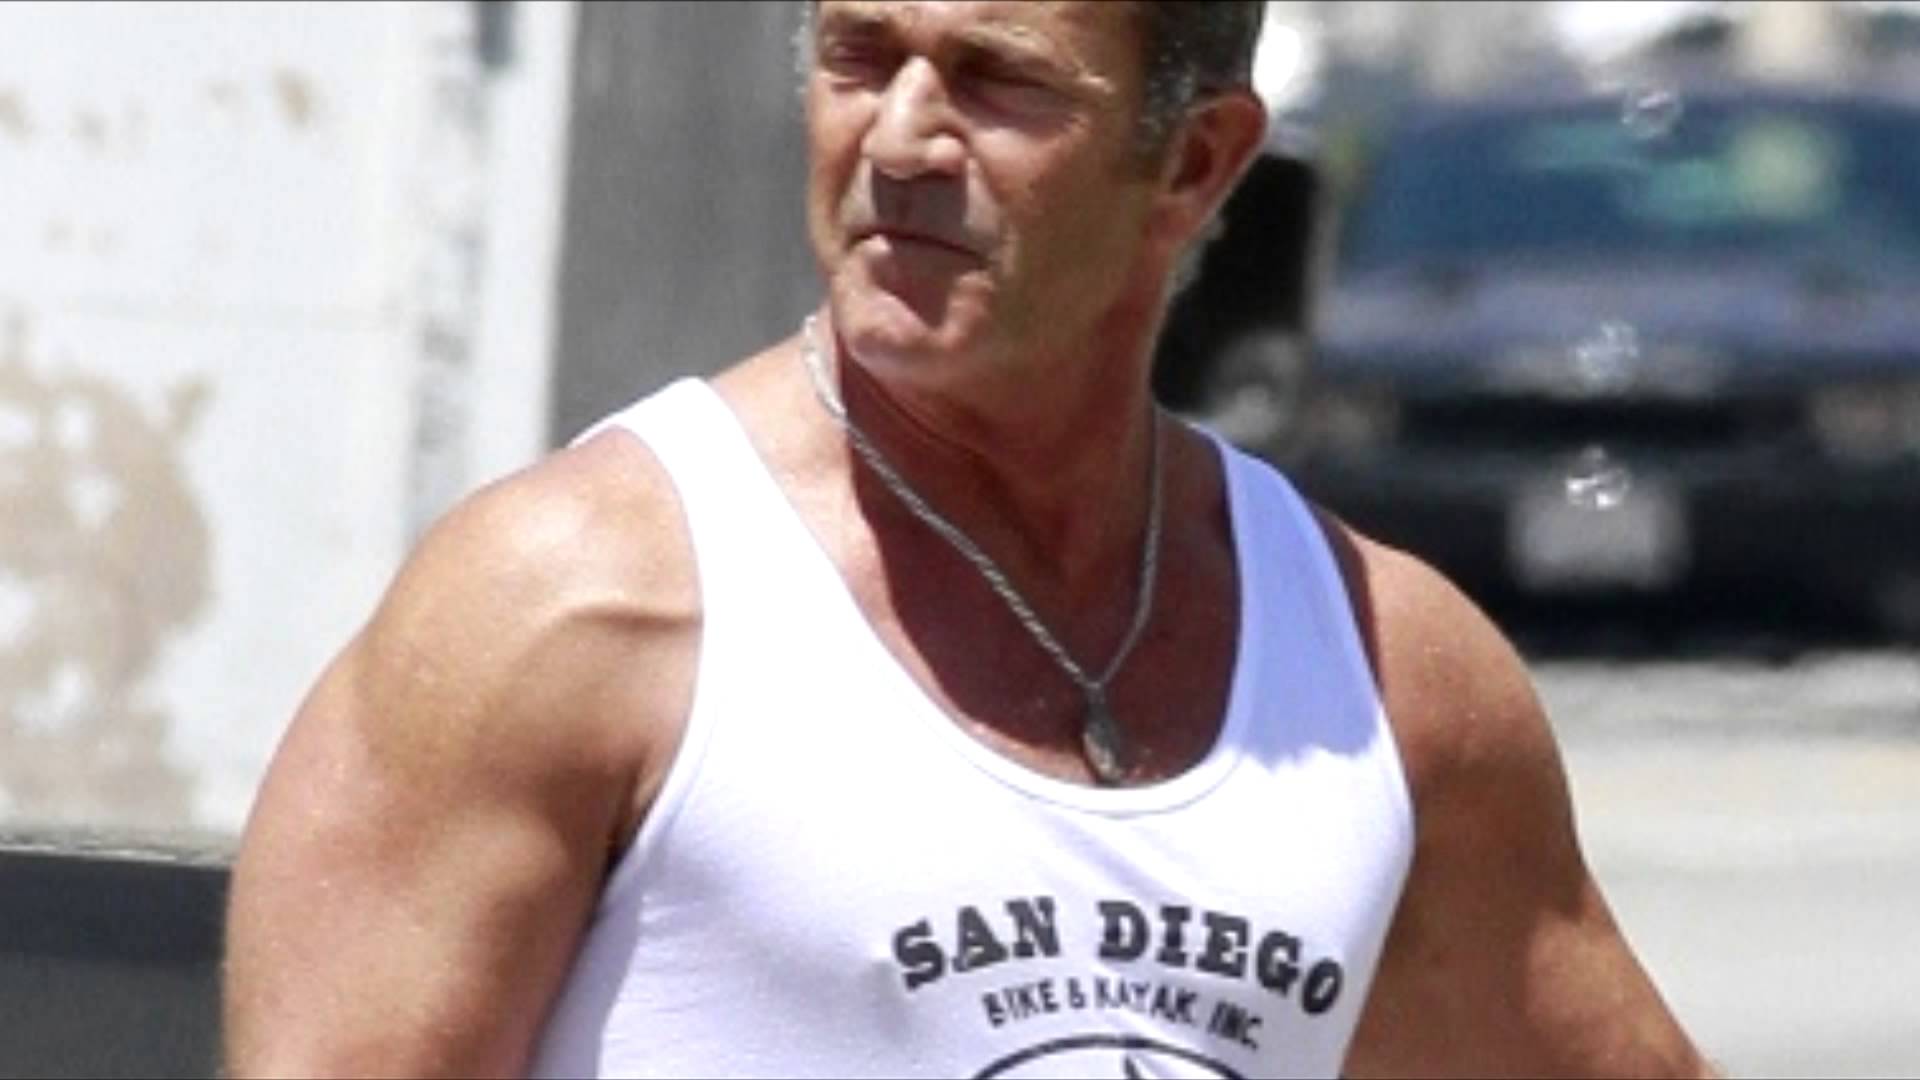 MEL GIBSON (57) is training for EXPENDABLES 3 (2014) and MACHETE